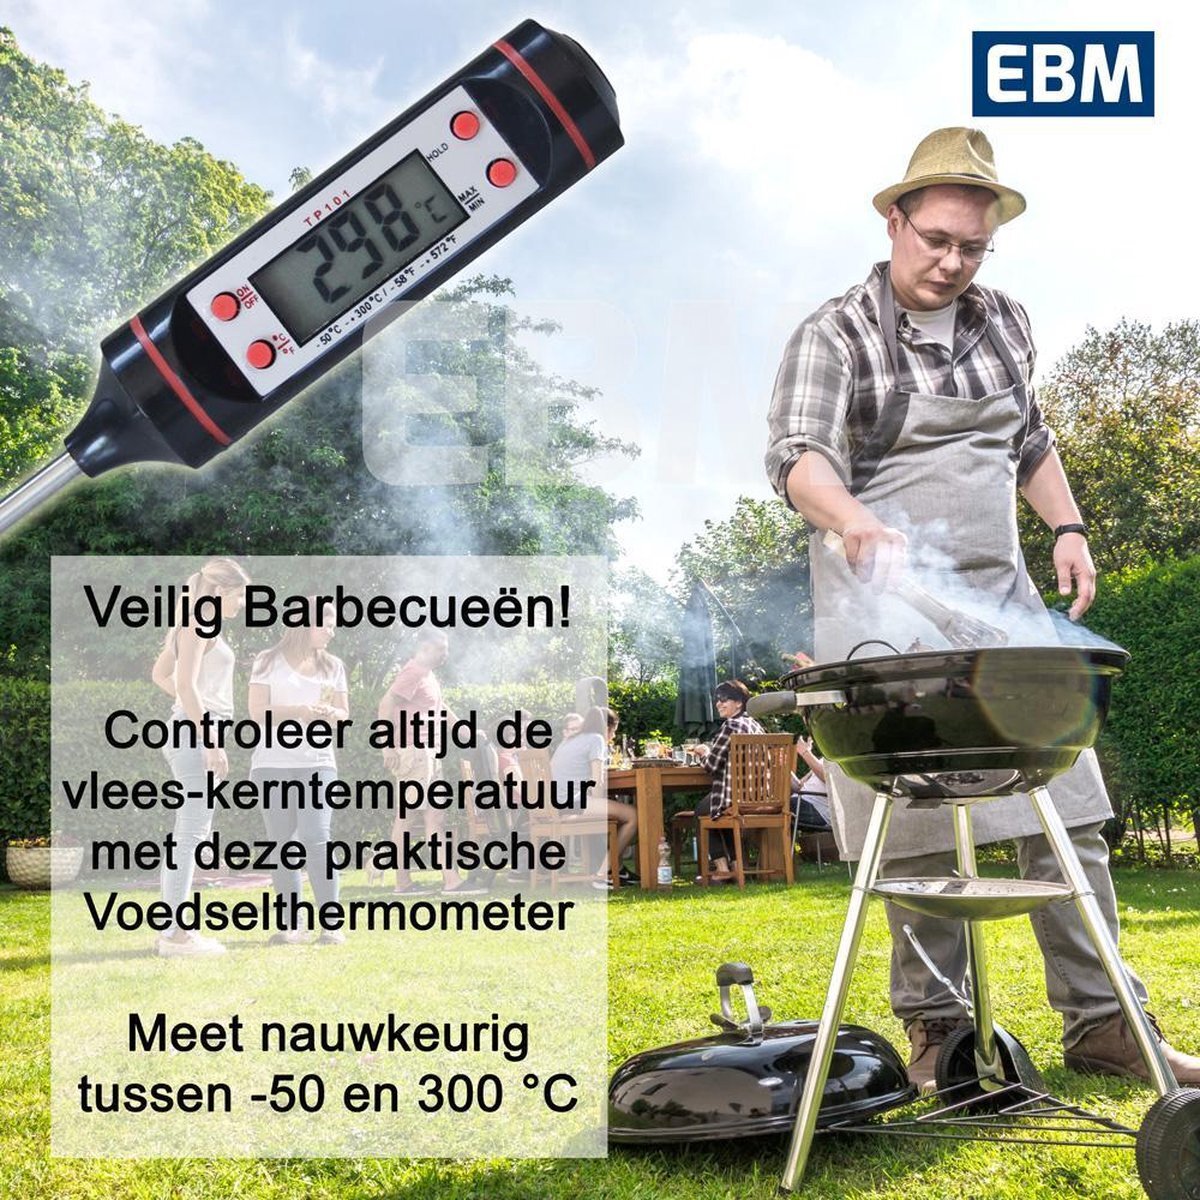 EBM Digitale Vleesthermometer / BBQ thermometer / Voedselthermometer - -50 tot +300 graden Celcius